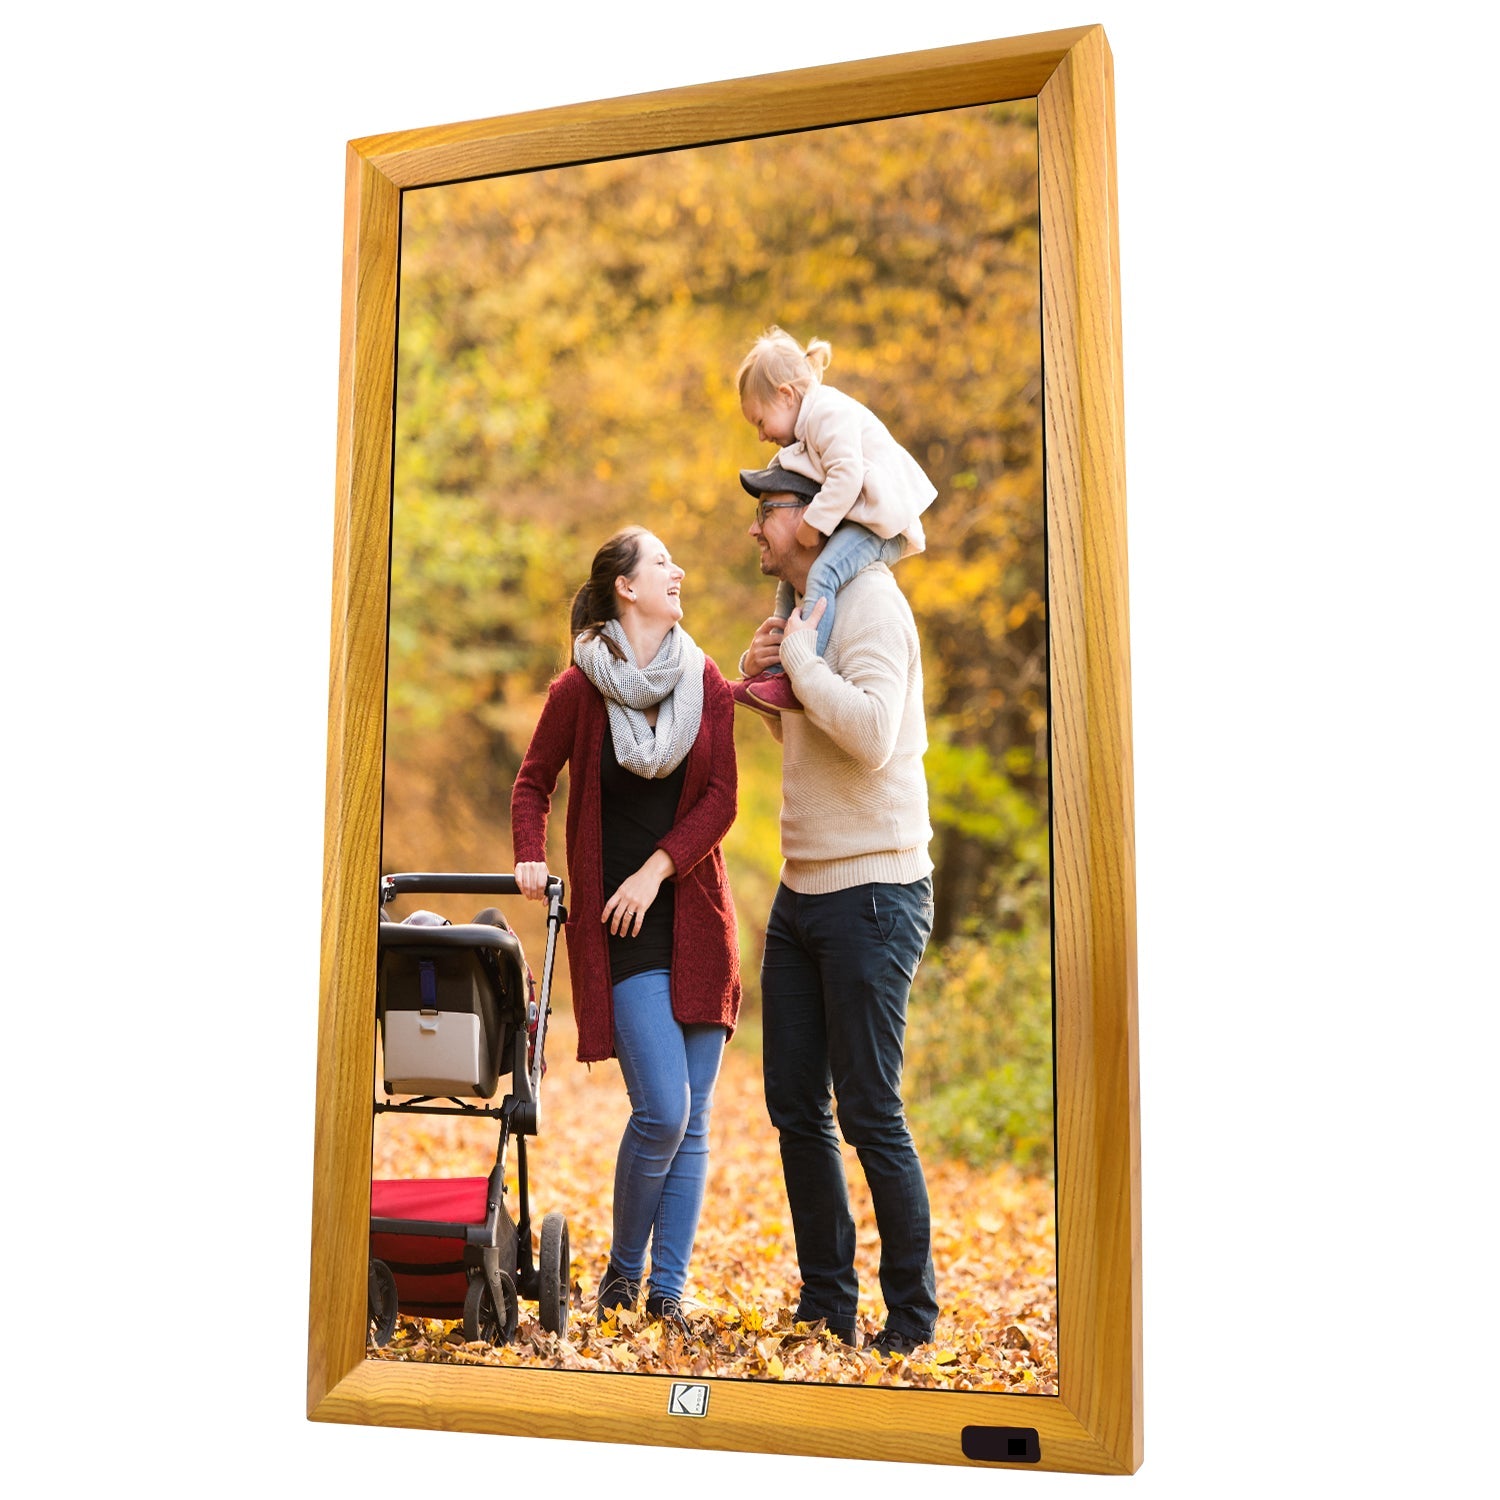 KODAK 23.8-inch Wi-Fi Enabled Digital Photo Frame WF238V, 32GB Internal Memory Wooden Frame with Photo, Video, Clock, Calendar, Weather and SD Card, USB and 3.5 Earphone Ports (Remote Control Incl.)